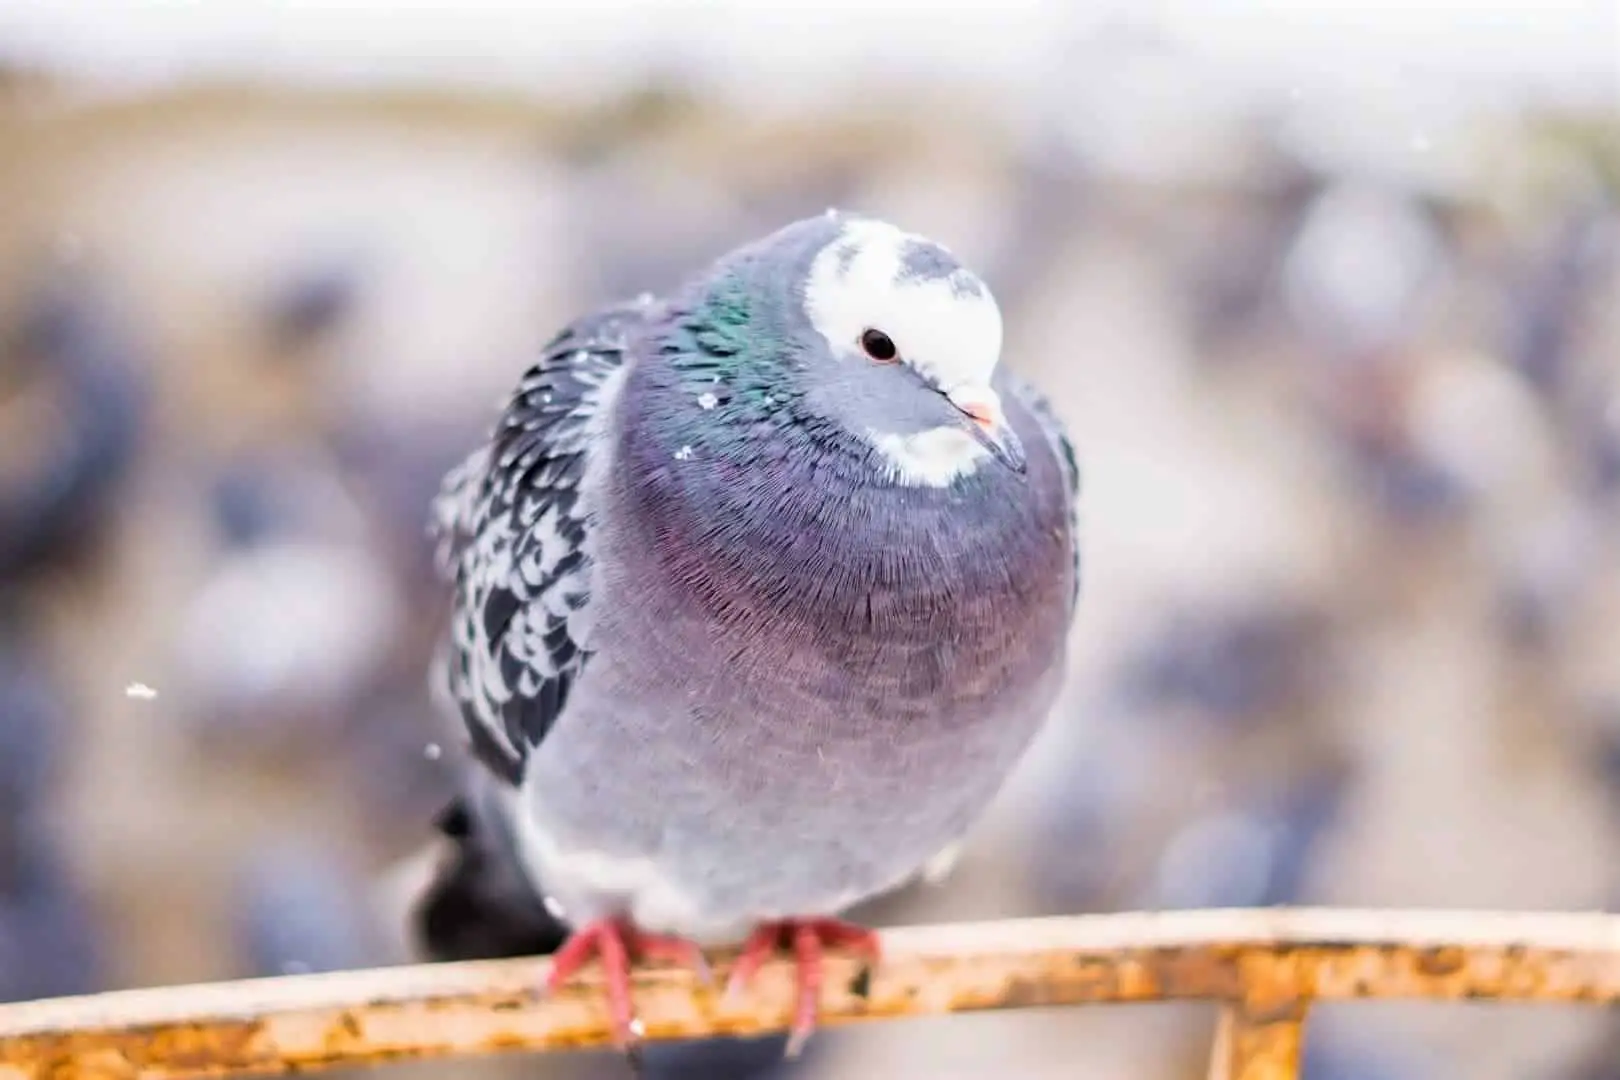 Do Pigeons Get Cold? How Do Pigeons Survive The Cold Winter?